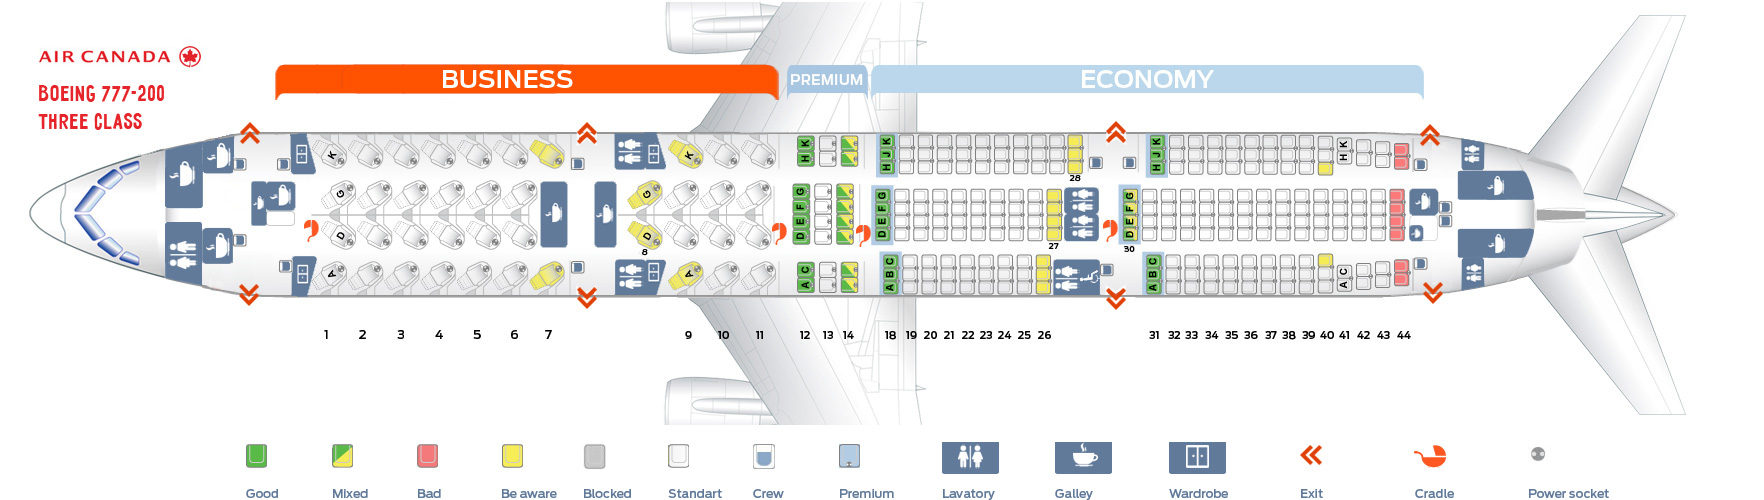 Seat Map and Seating Chart Boeing 777 200LR Air Canada